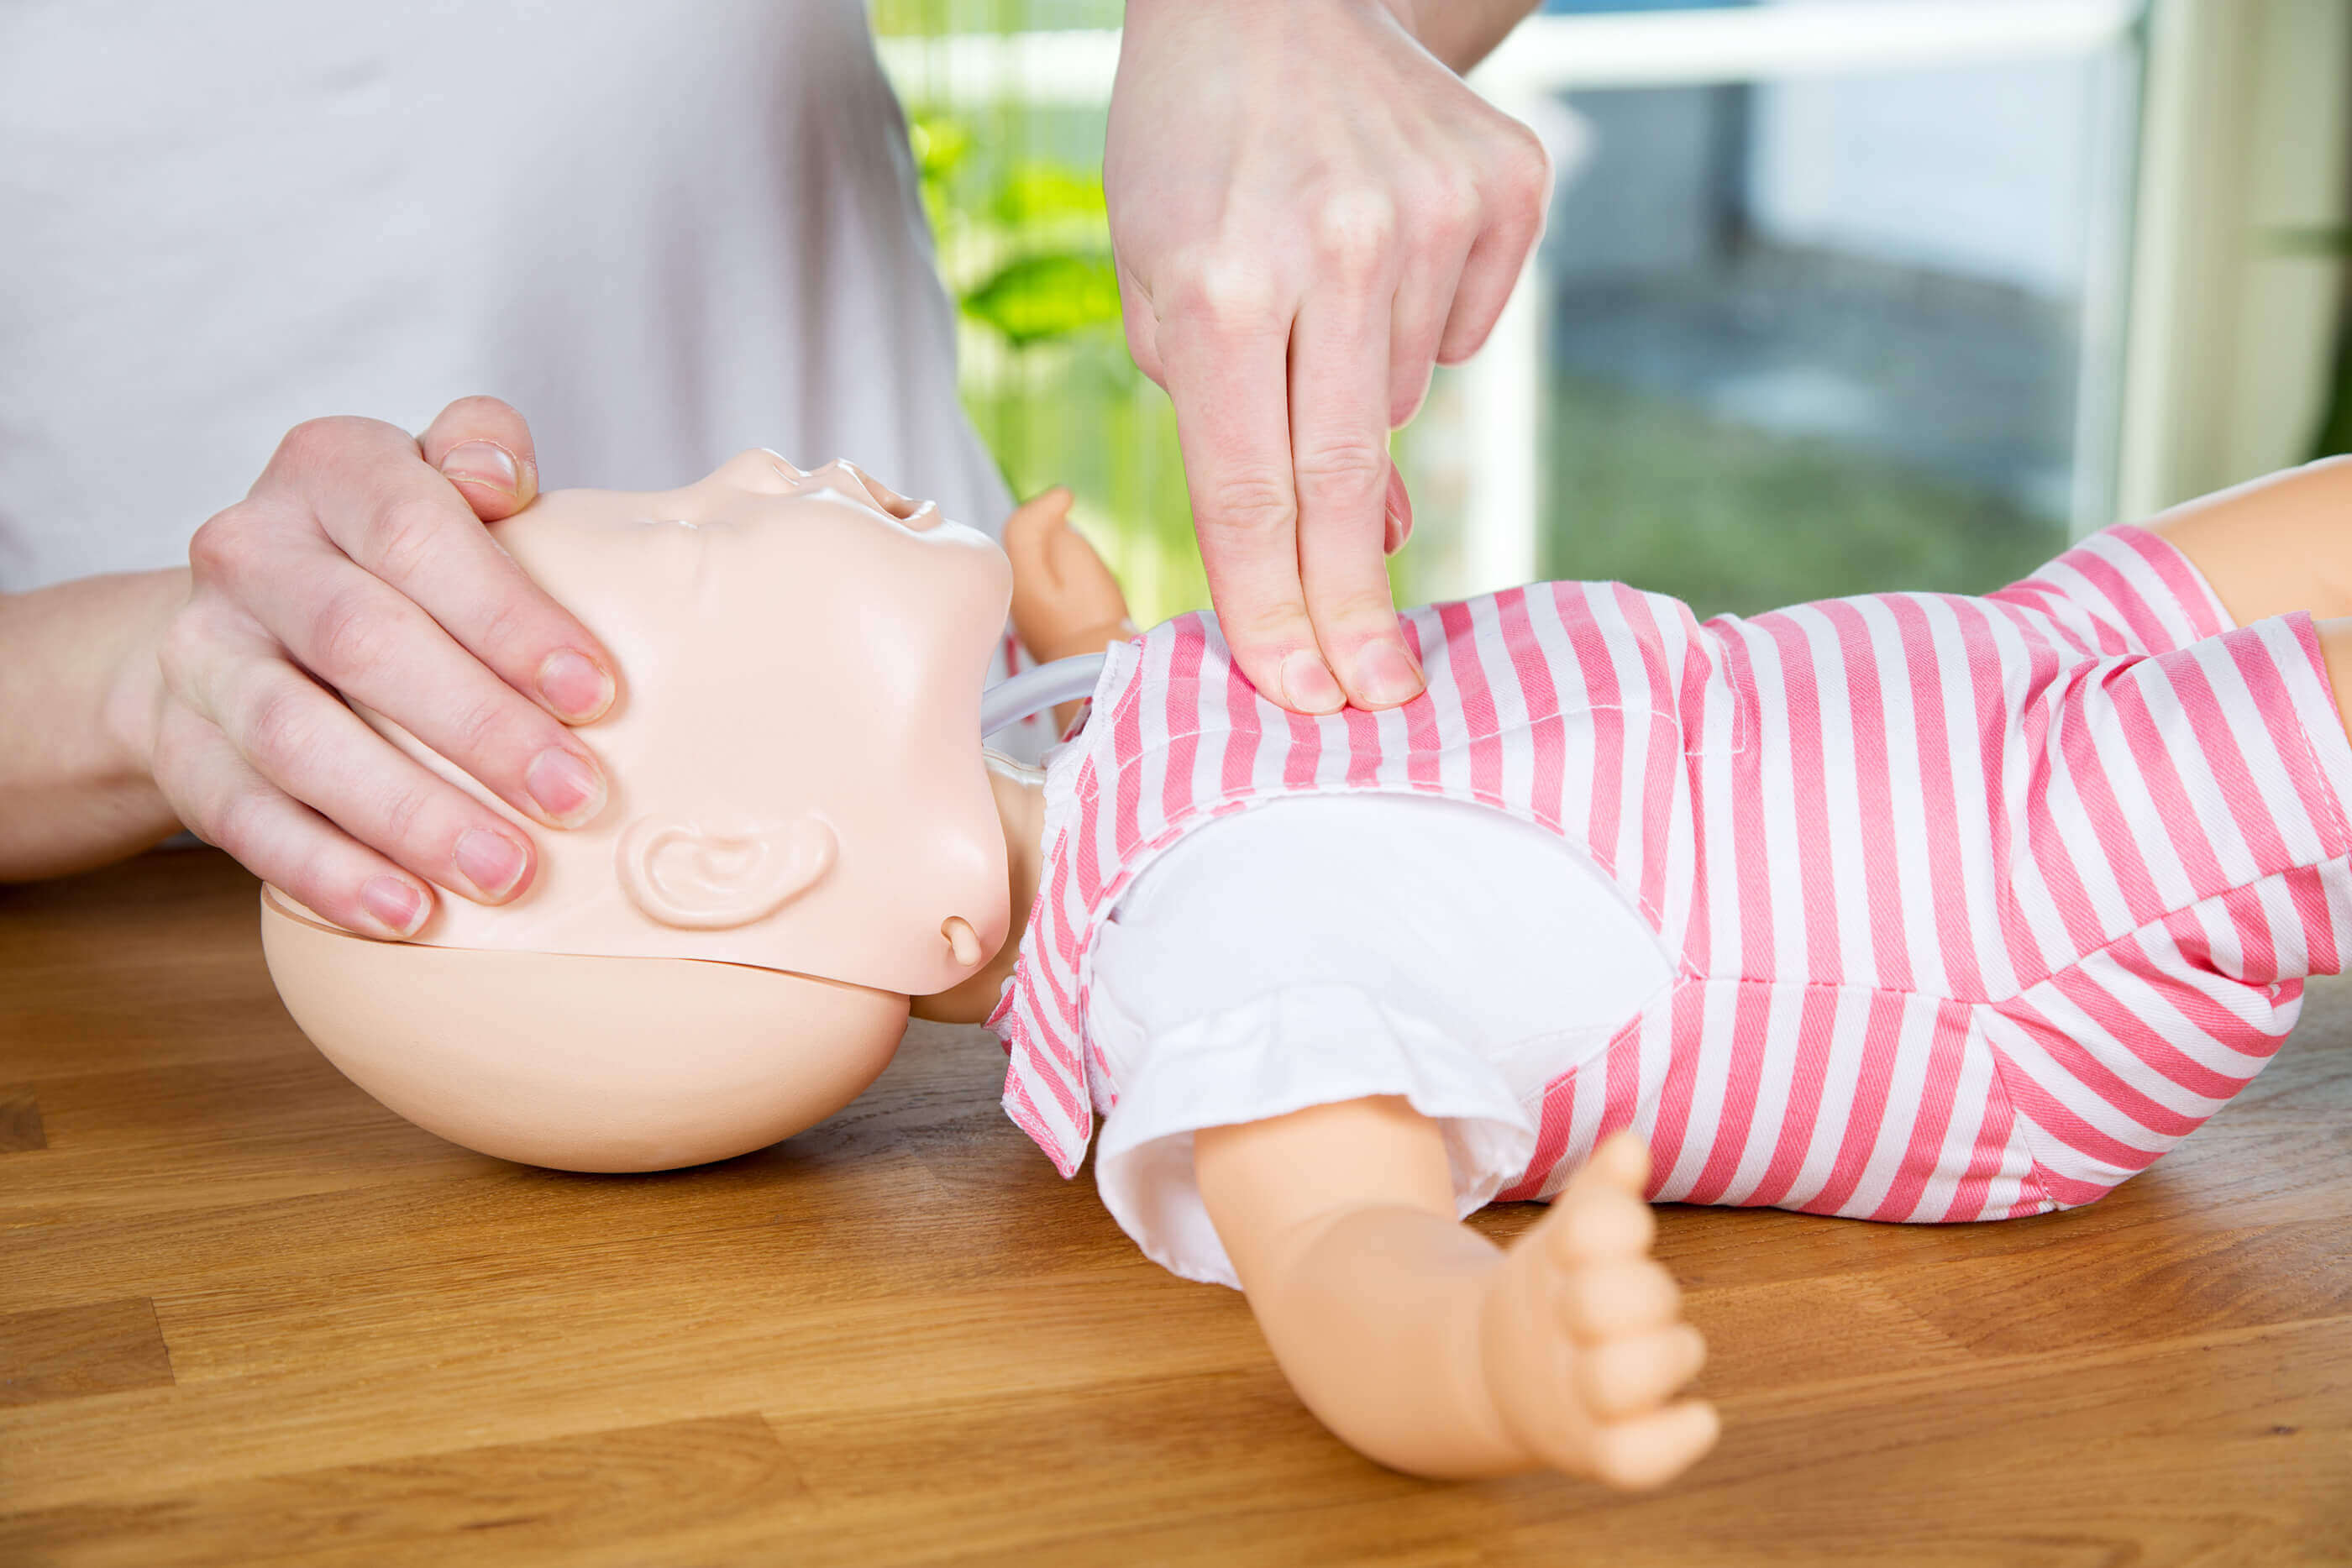 Child Care First Aid